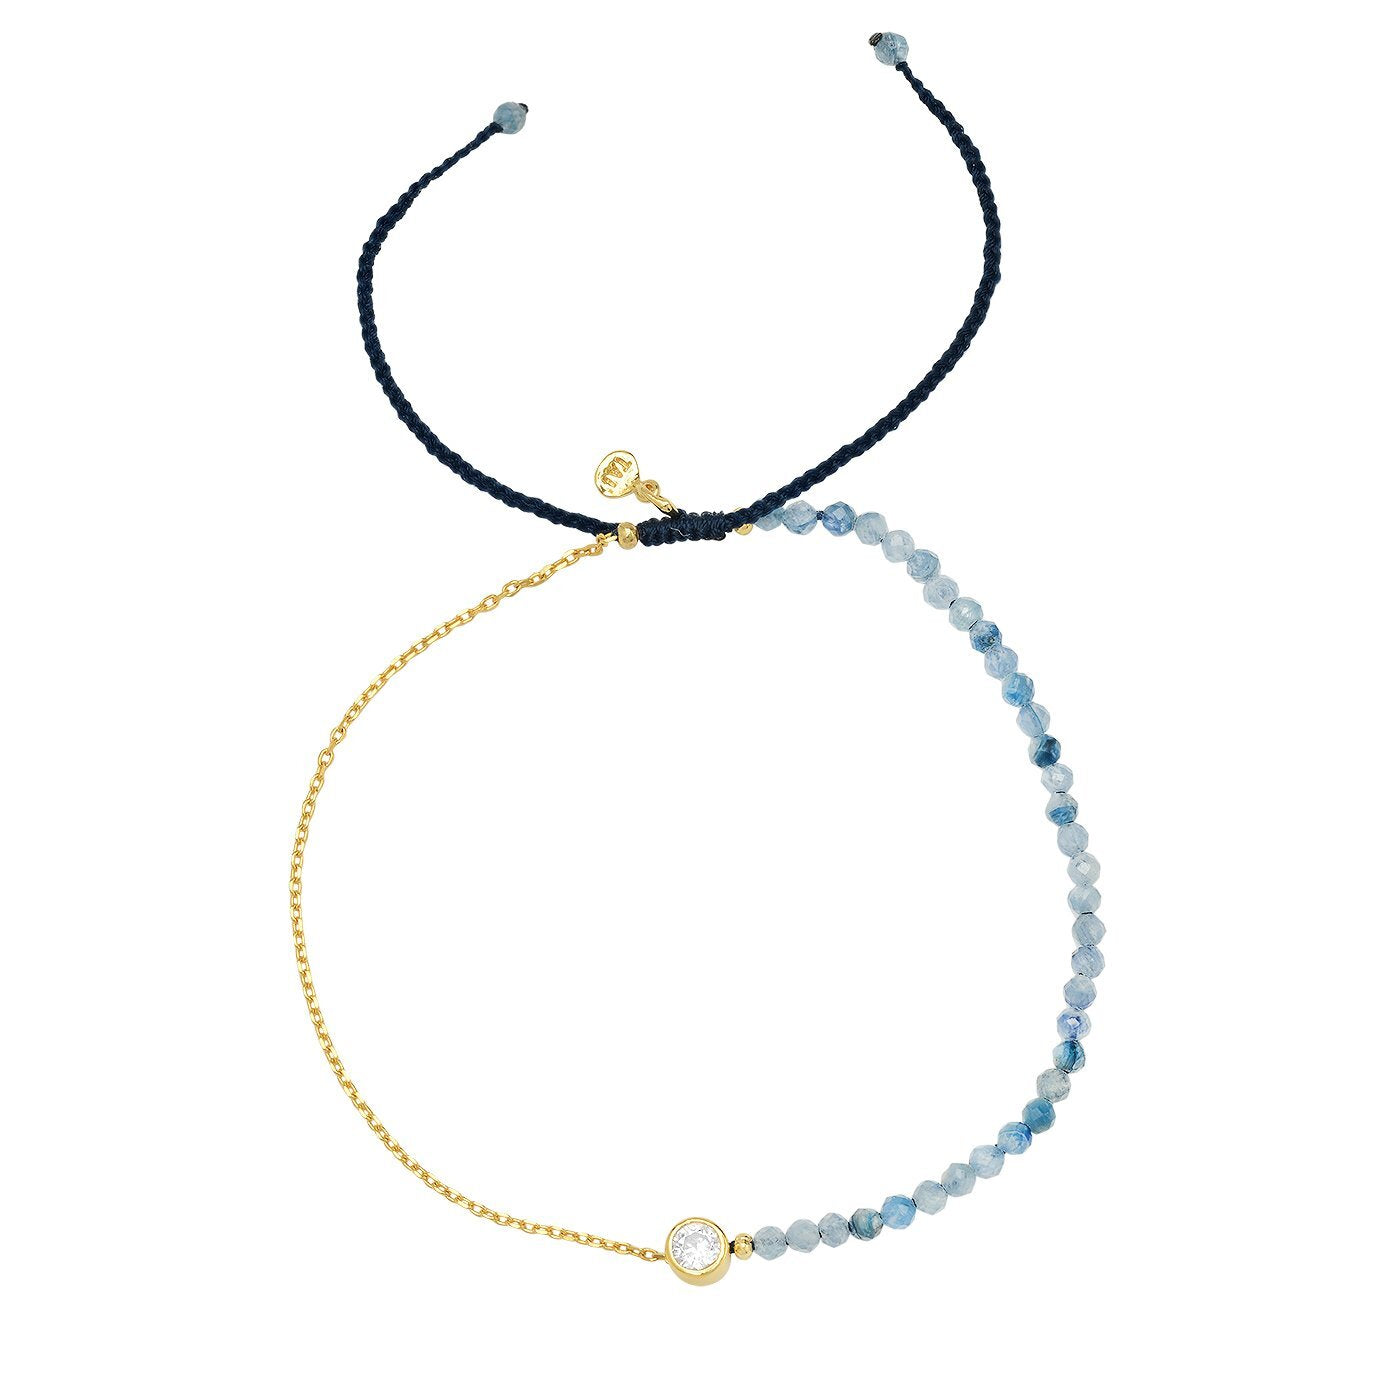 Blue woven pull-tie closure, stone beads, gold-plated brass chain